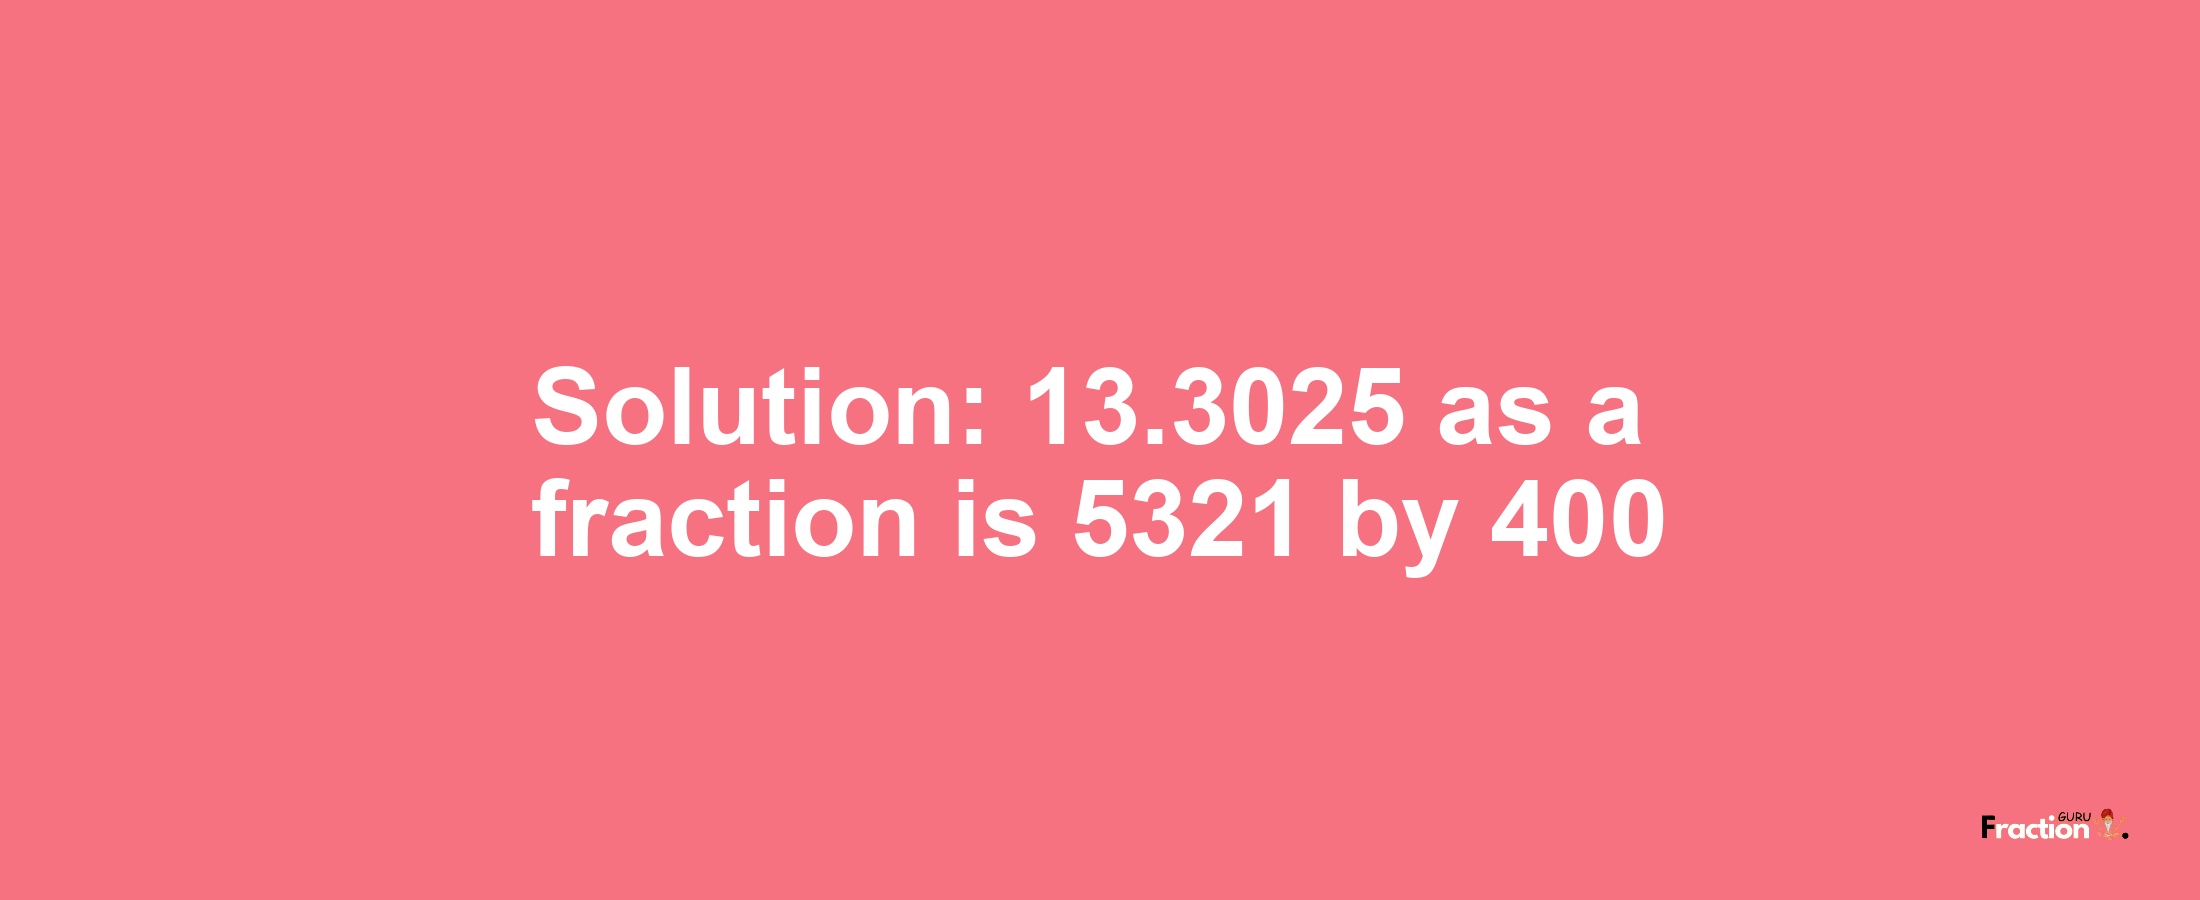 Solution:13.3025 as a fraction is 5321/400